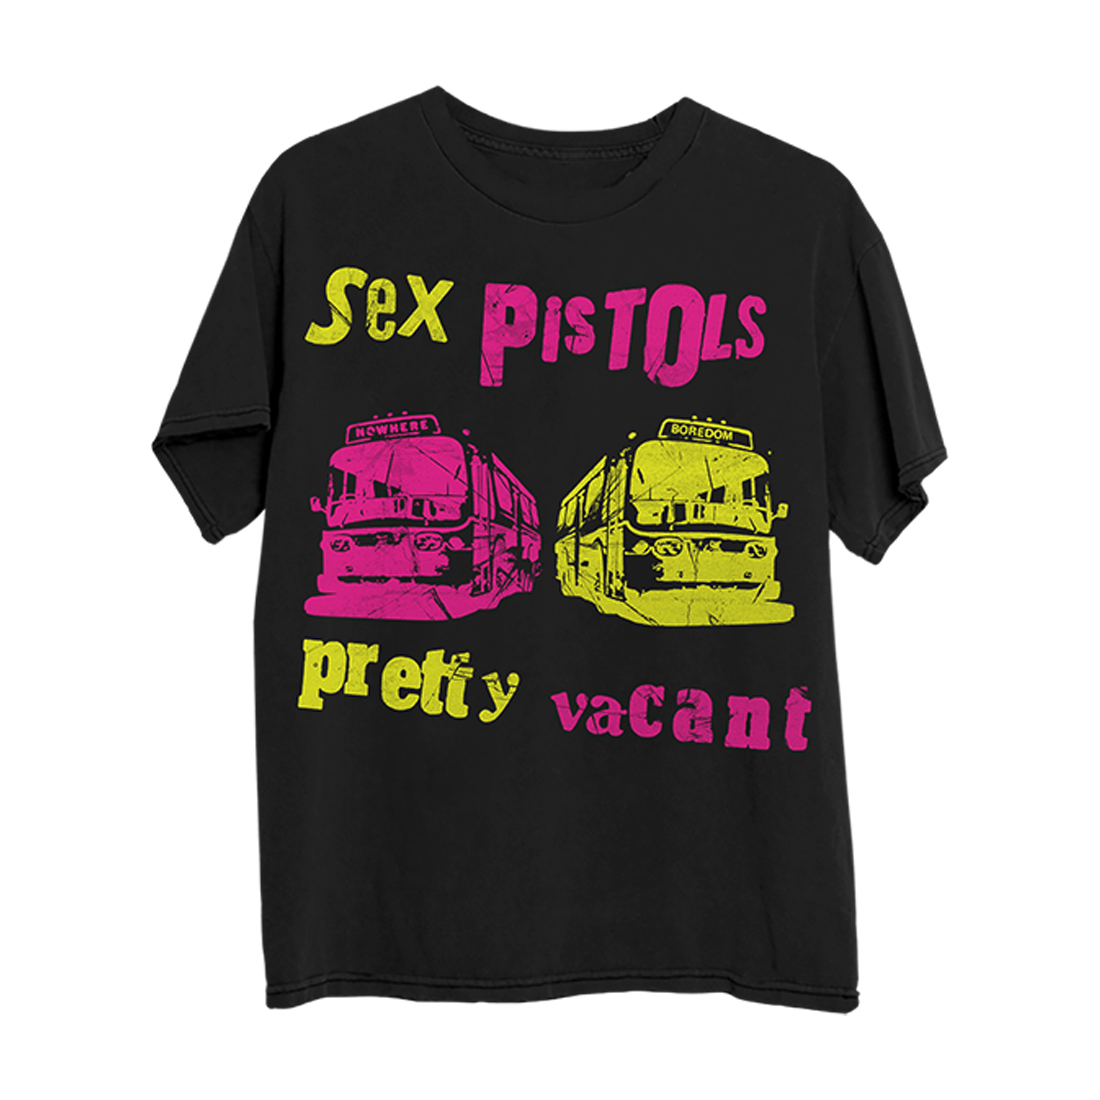 Pretty Vacant: Red Vinyl 7" Single, T-Shirt + Poster